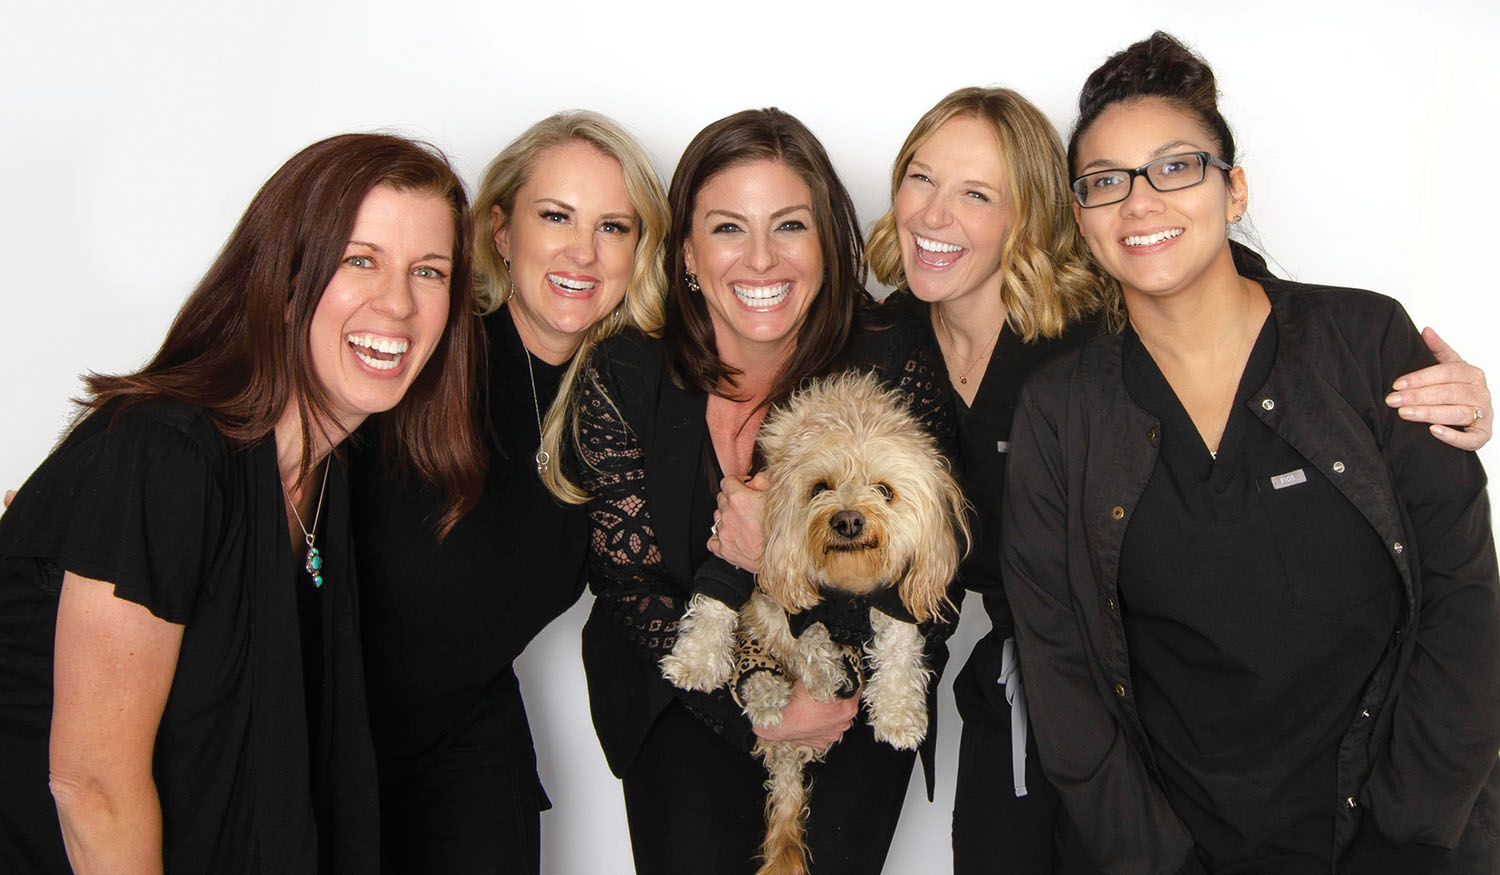 The Dental Team at Complete Family & Aesthetic Dentistry